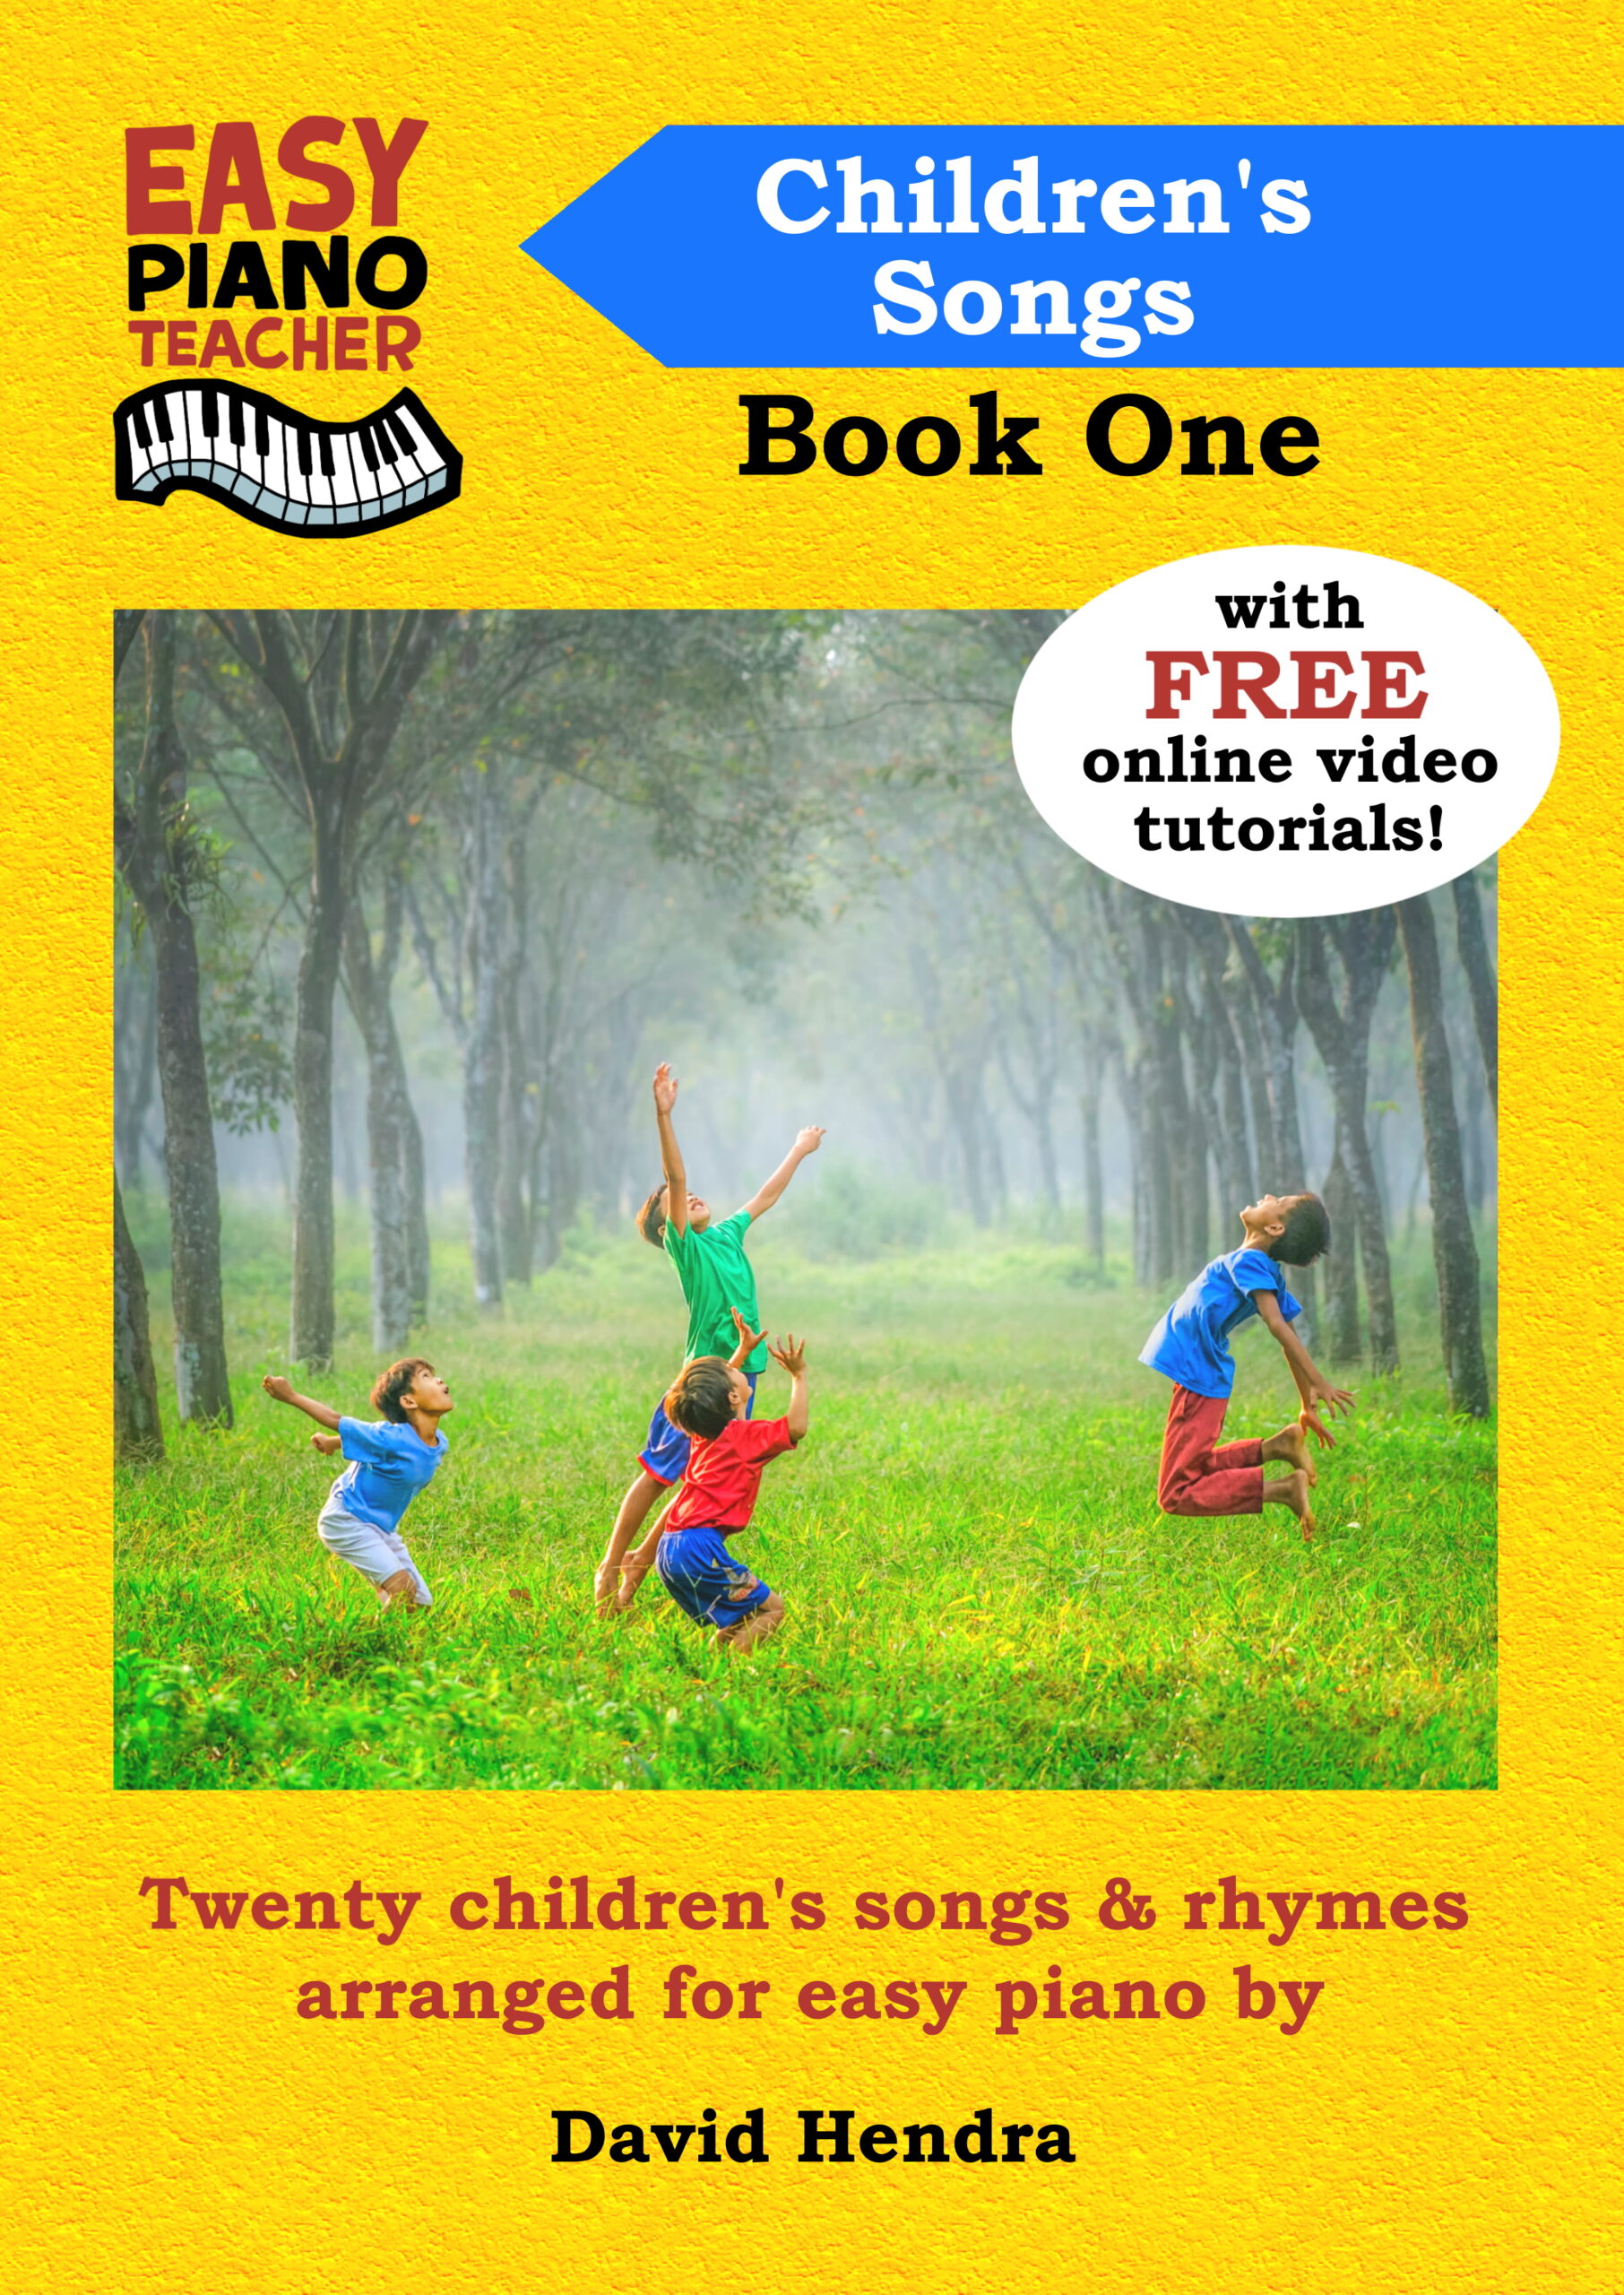 Children's songs 1 FRONT COVER ONLY